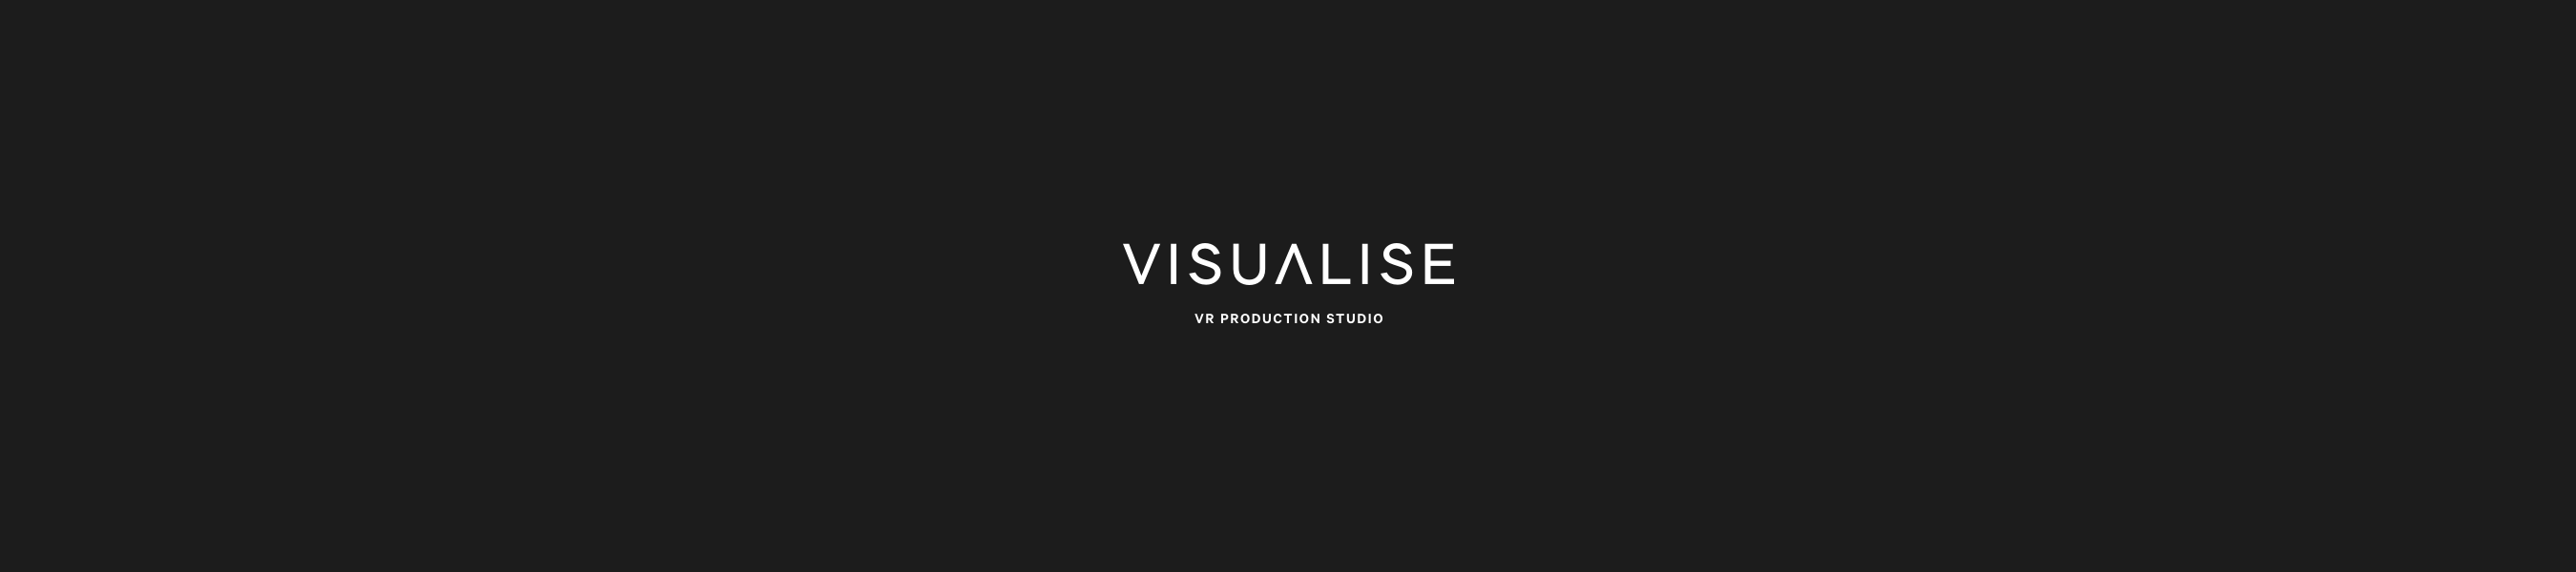 Watching VR with Visualise